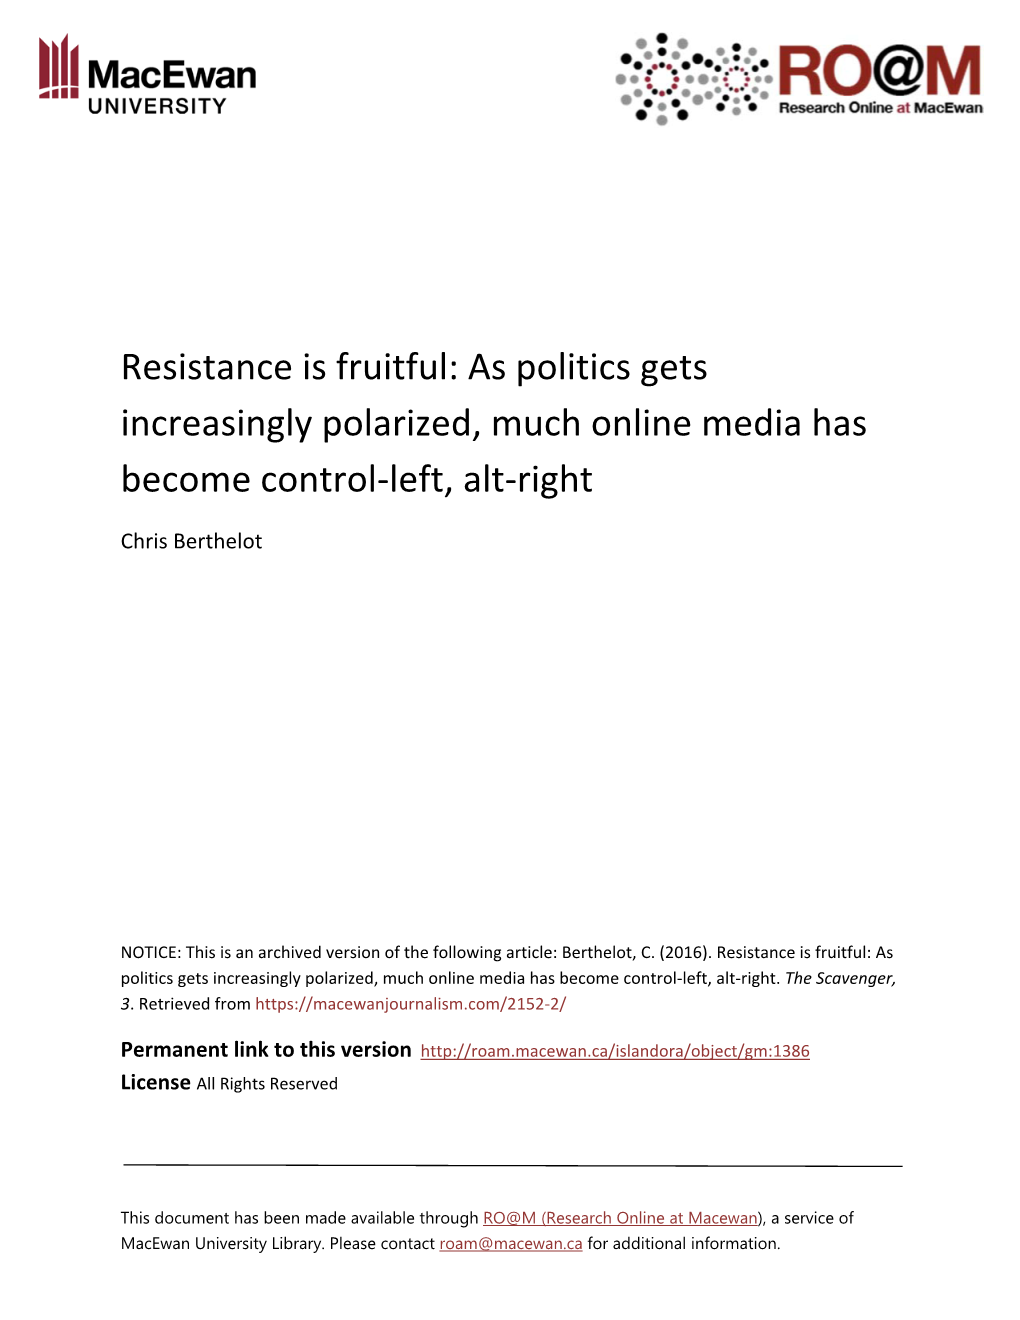 As Politics Gets Increasingly Polarized, Much Online Media Has Become Control‐Left, Alt‐Right